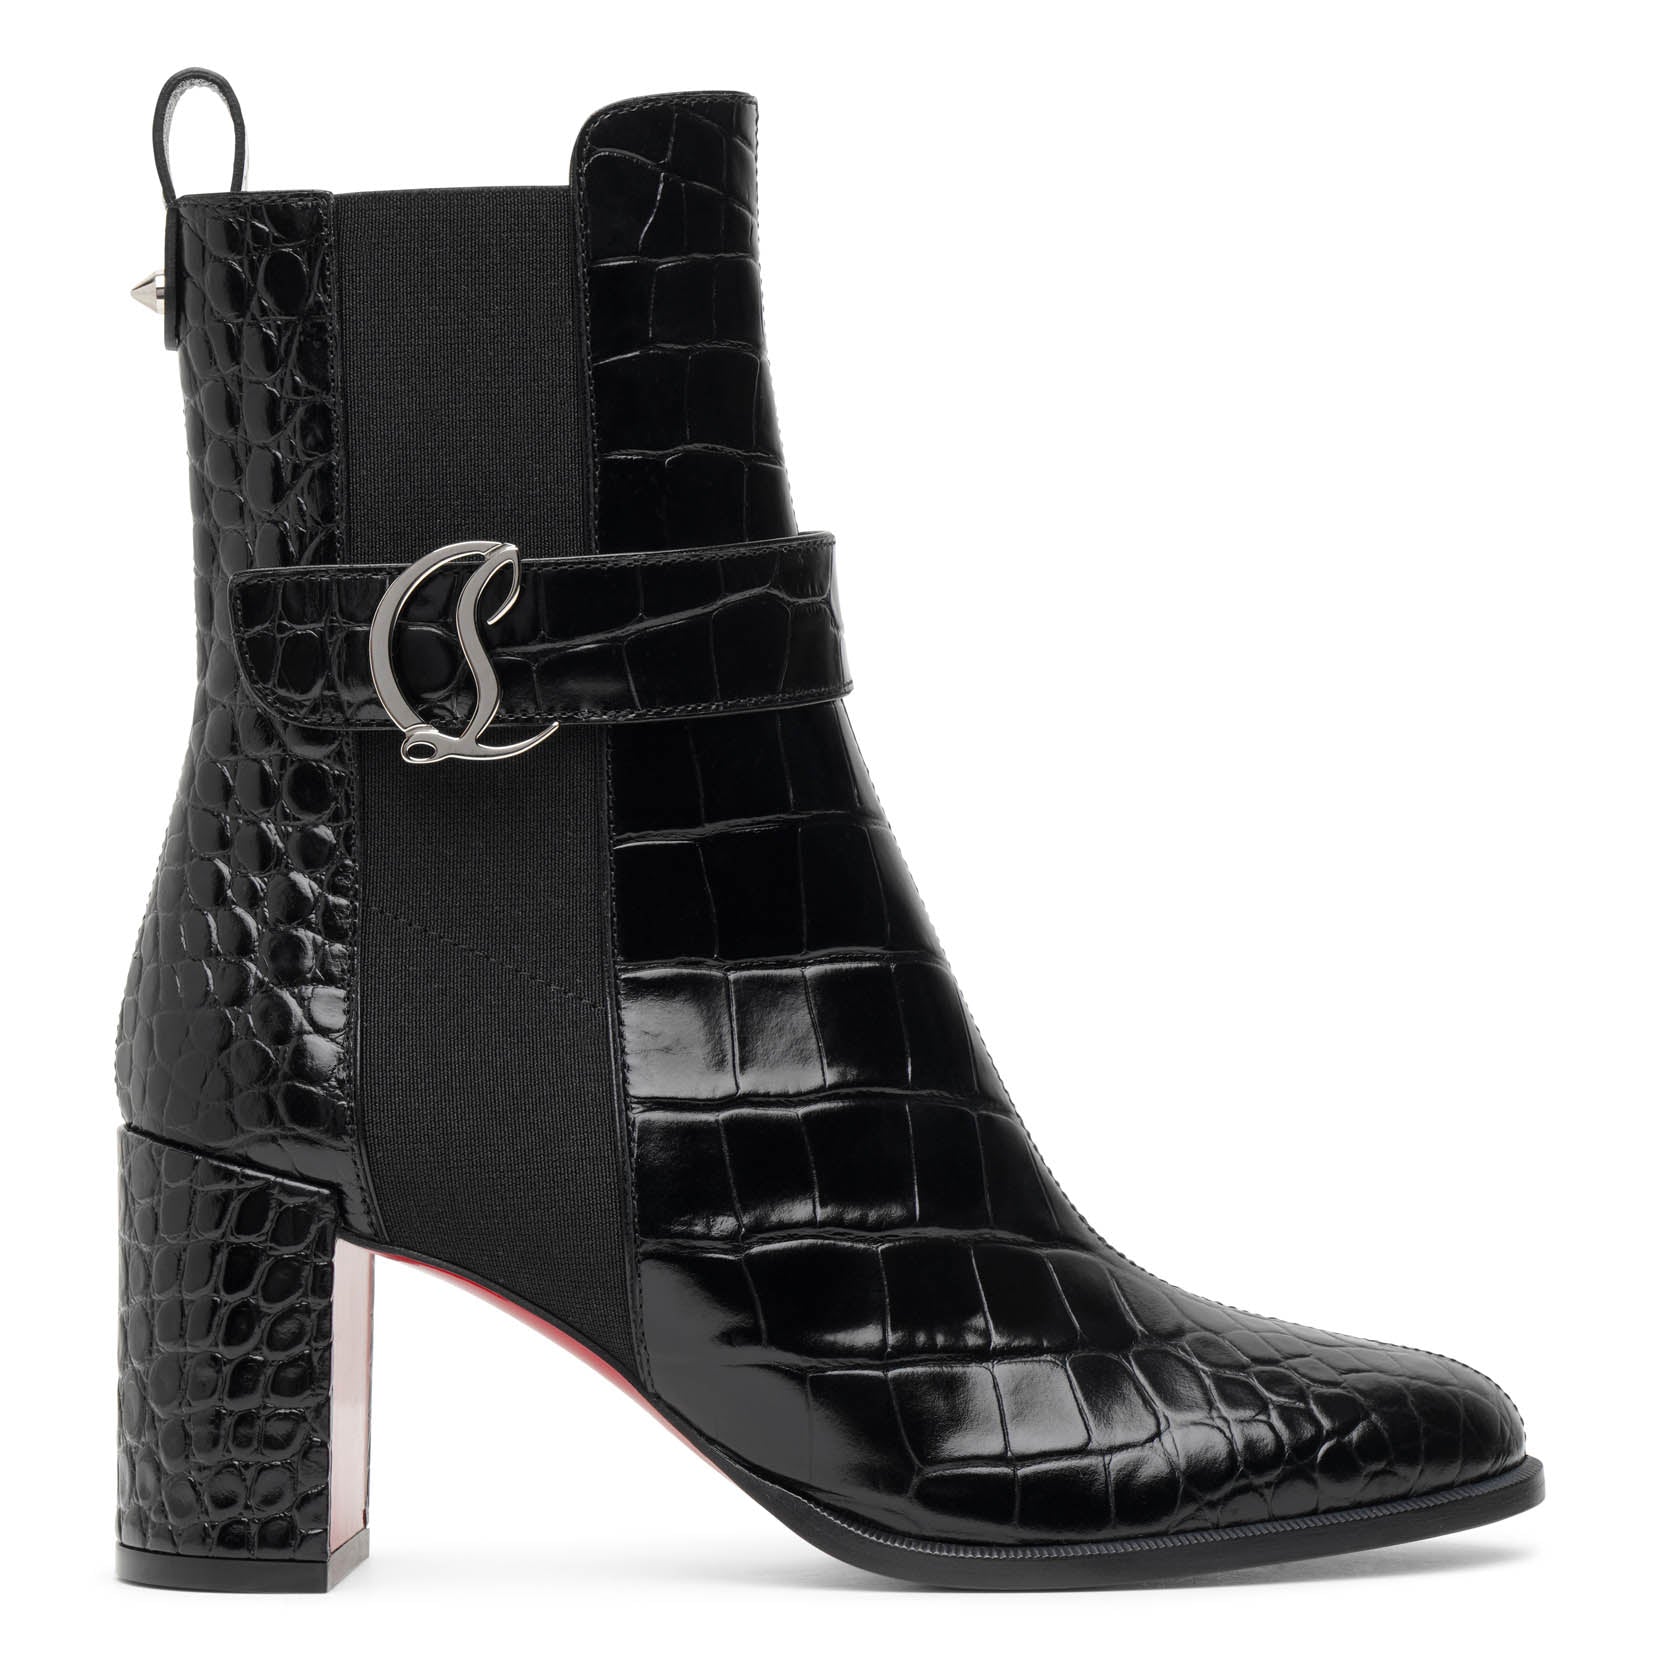 CHRISTIAN LOUBOUTIN CL CHELSEA 70 EMBOSSED BLACK LEATHER ANKLE BOOTS